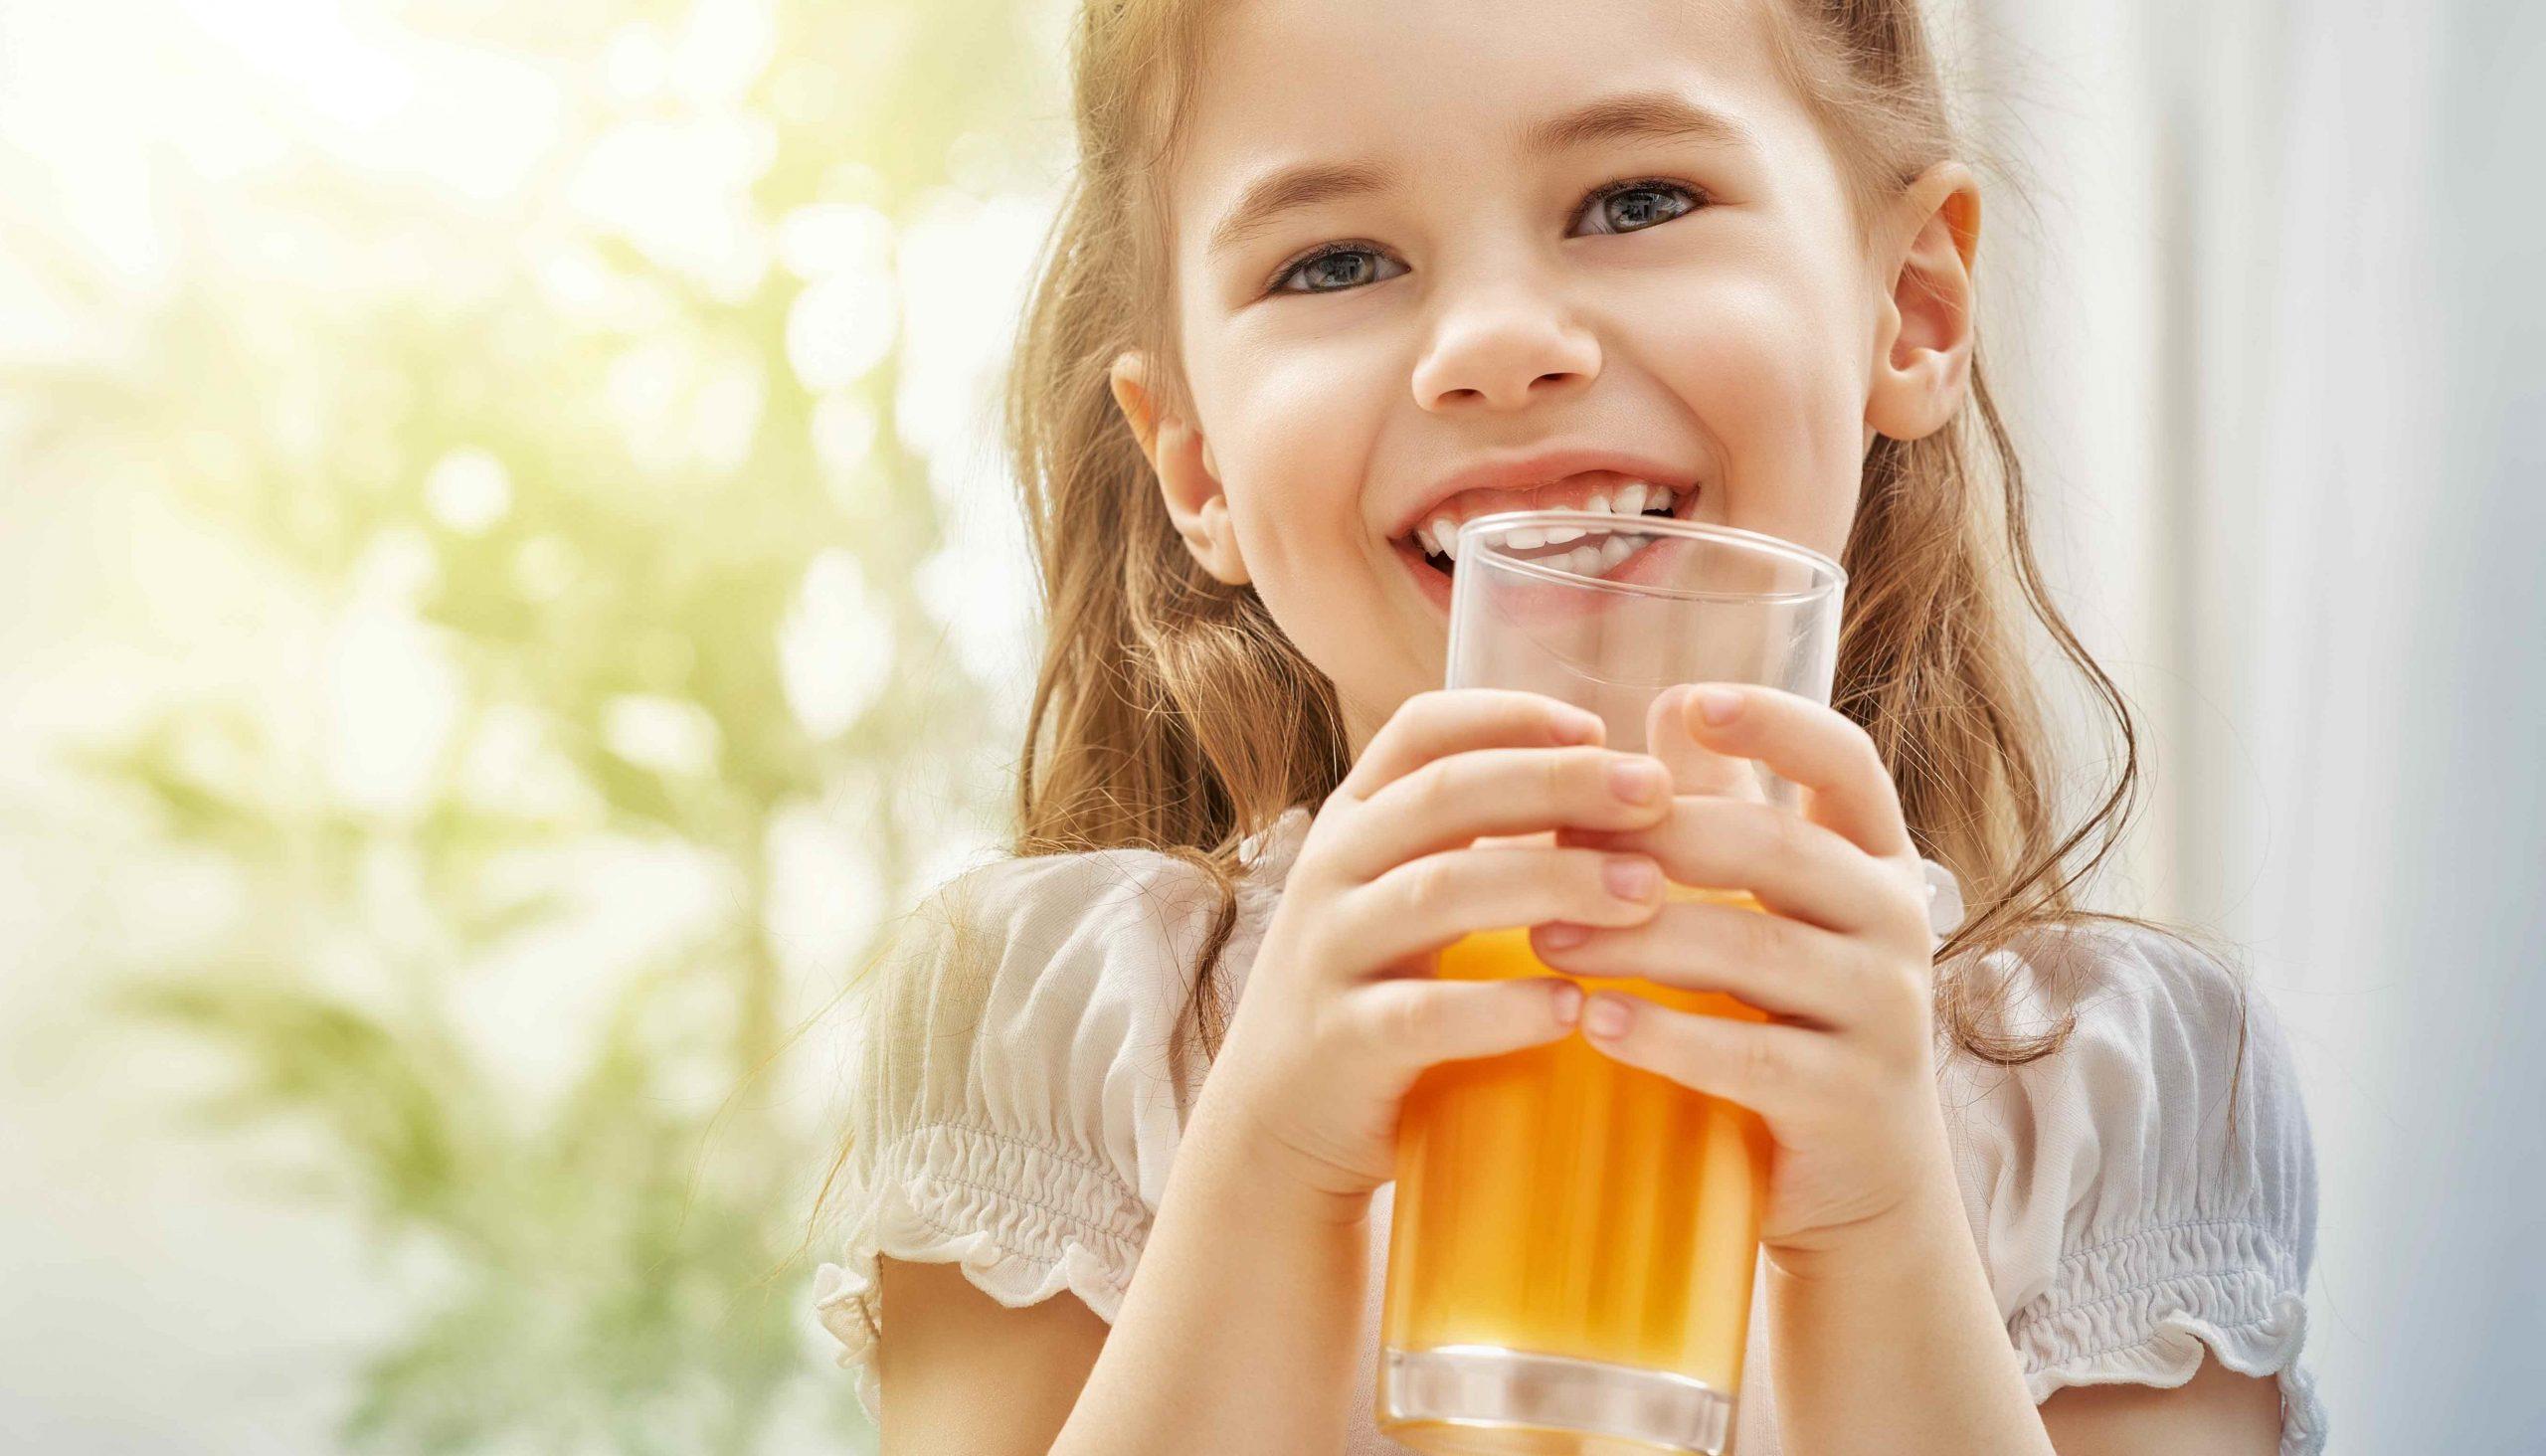 Find out the research to see if juice is healthy for kids and what it does to the boy. How Juice Went From a Health Food to a Junk Food